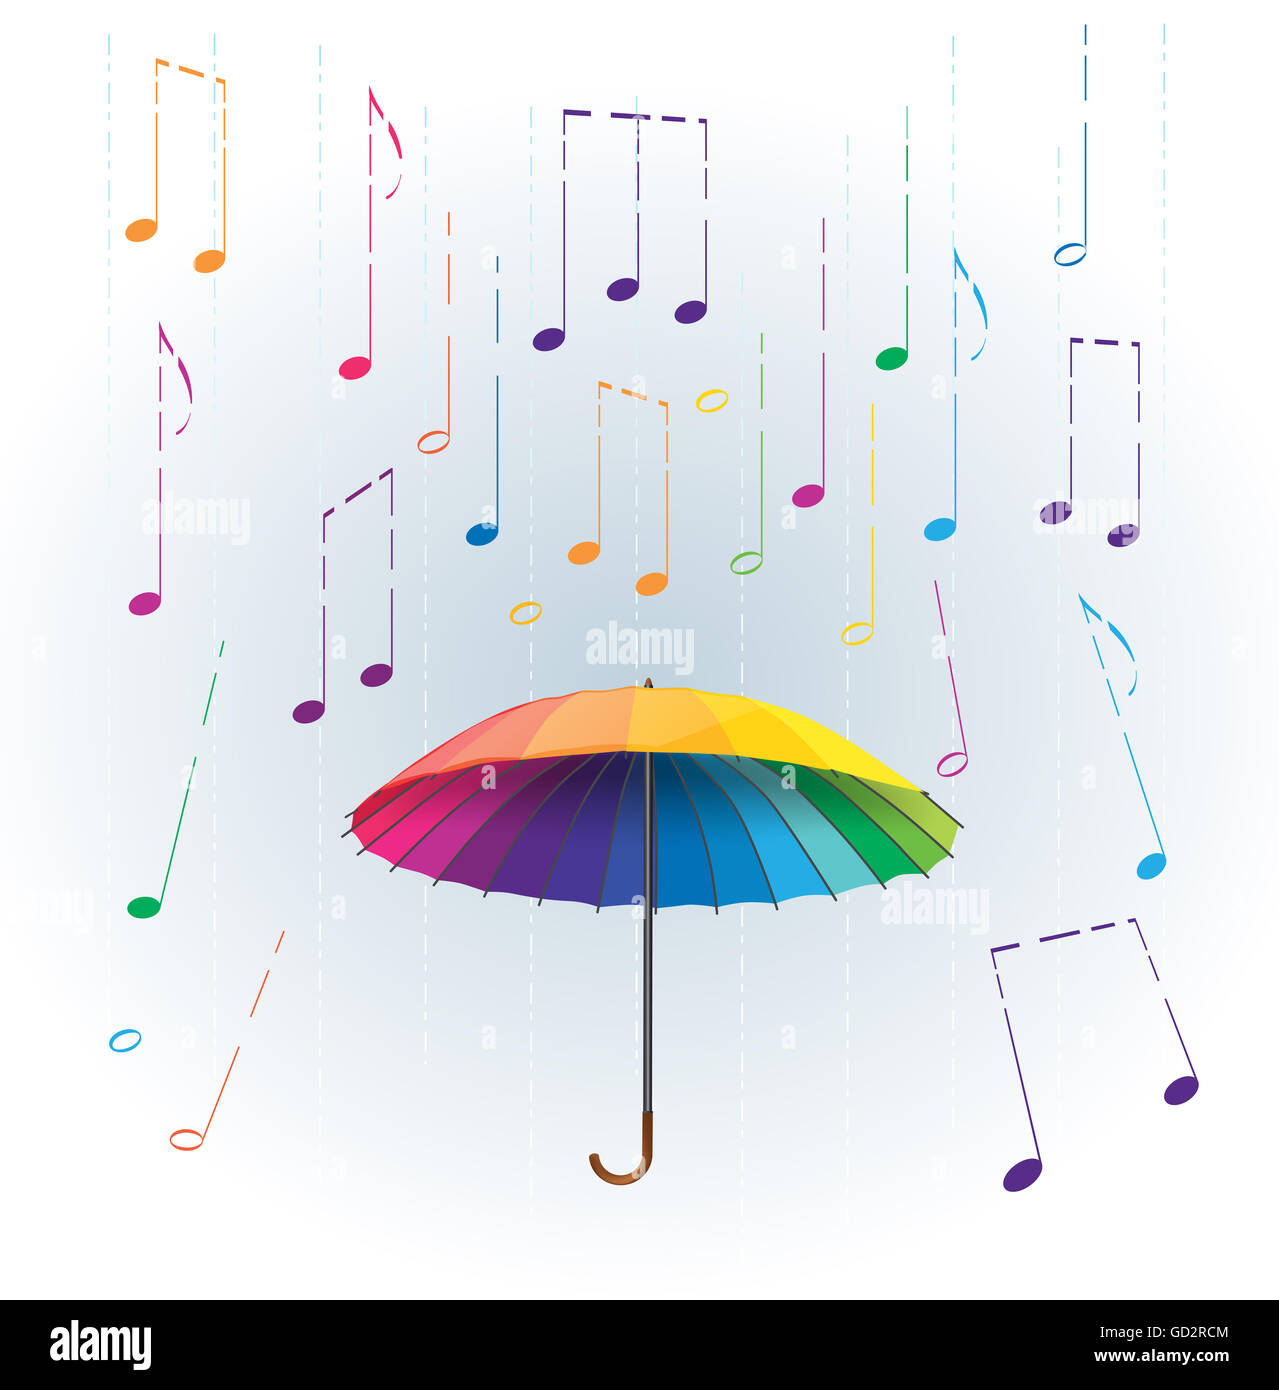 colorful rainbow umbrella with stylized like rain falling musical notes. abstract musical illustration Stock Photo